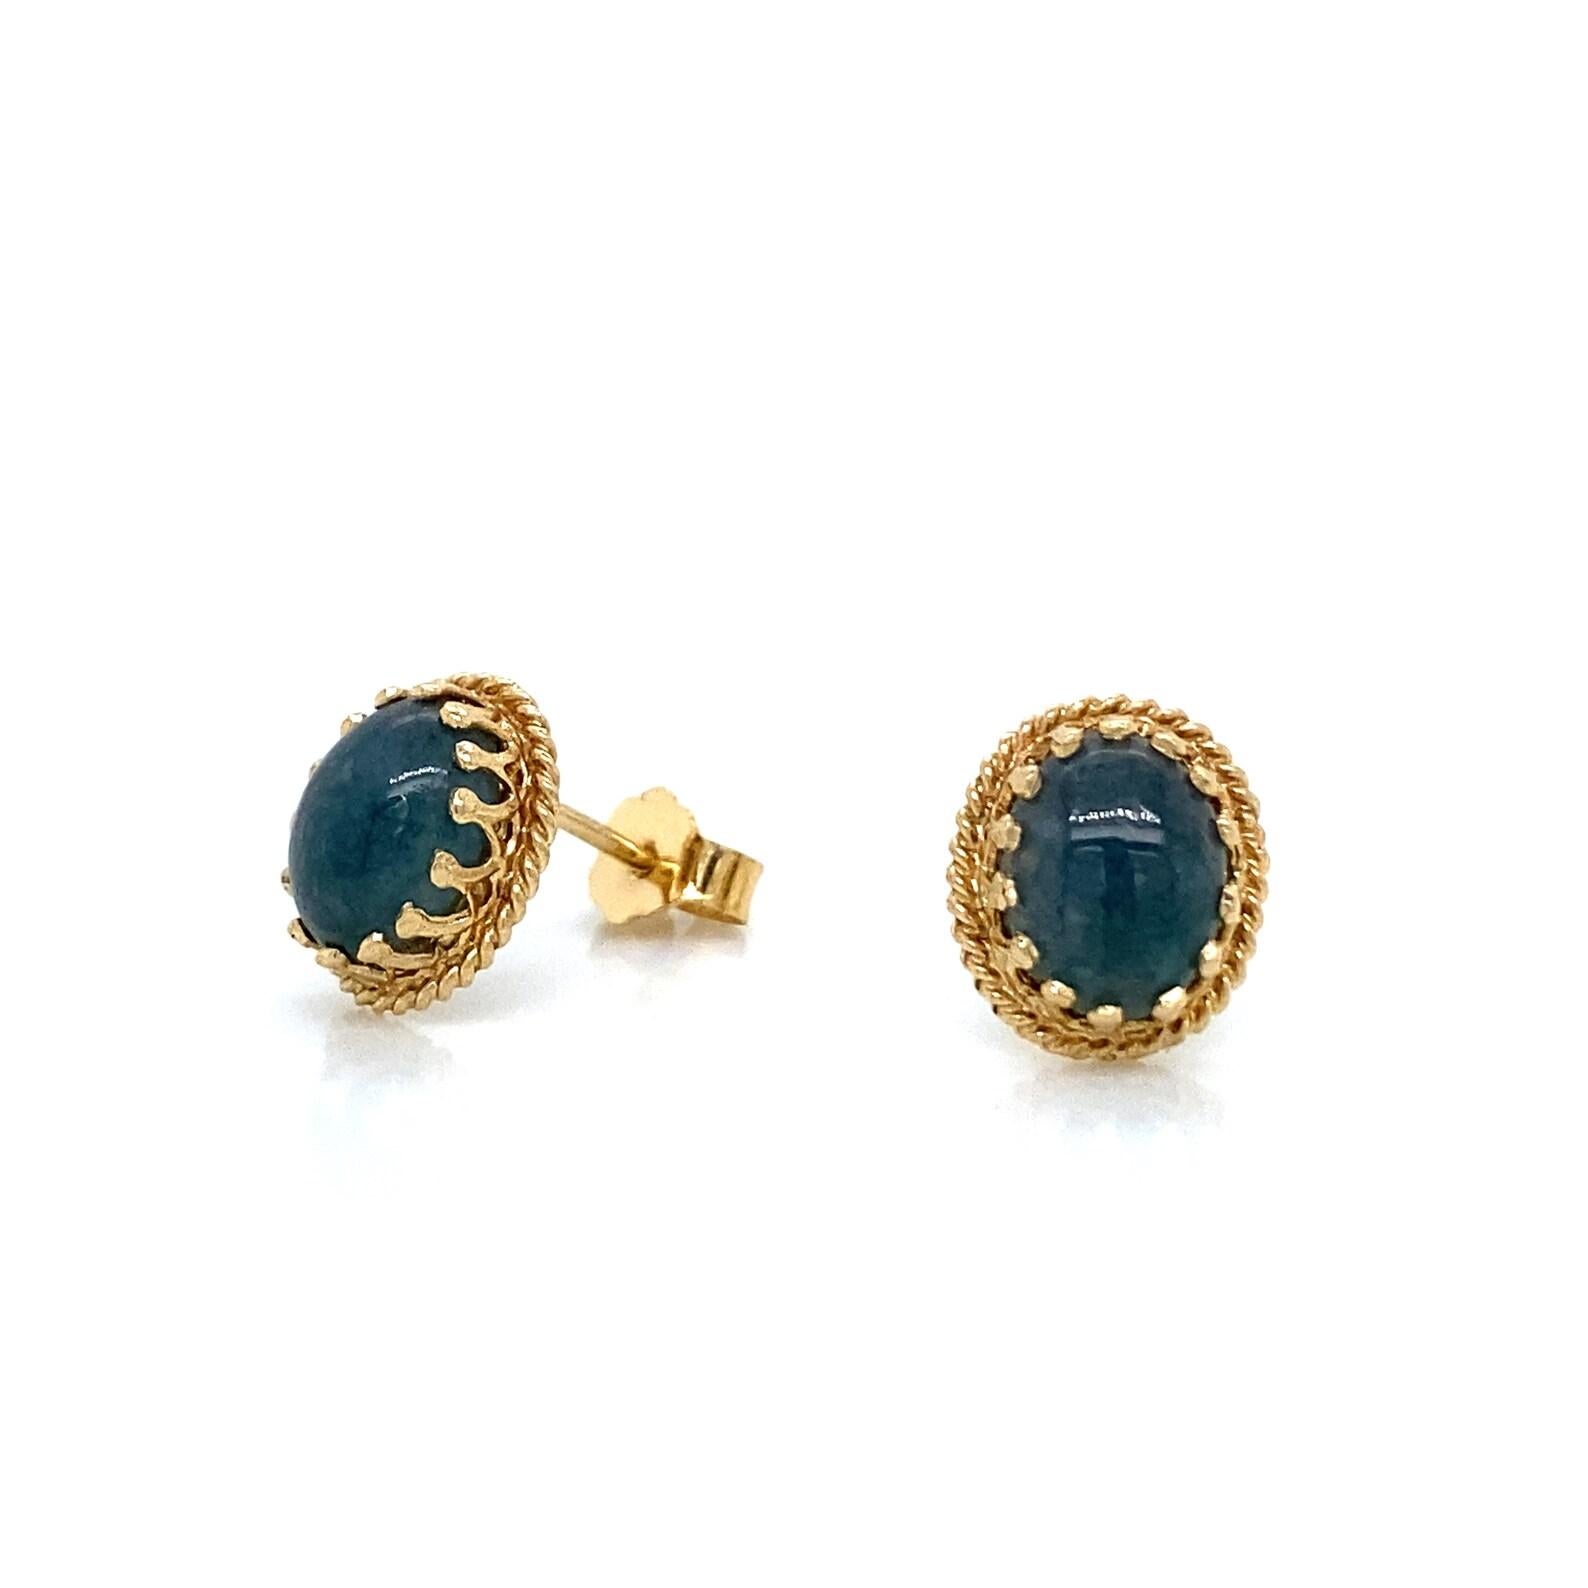 Crafted in 14K Yellow Gold with Jade stones.

These gorgeous vintage jade earrings have been inspected by our jewelers for quality and authenticity. They are ready to wear. Free expedited shipping within the continental US makes our clearance